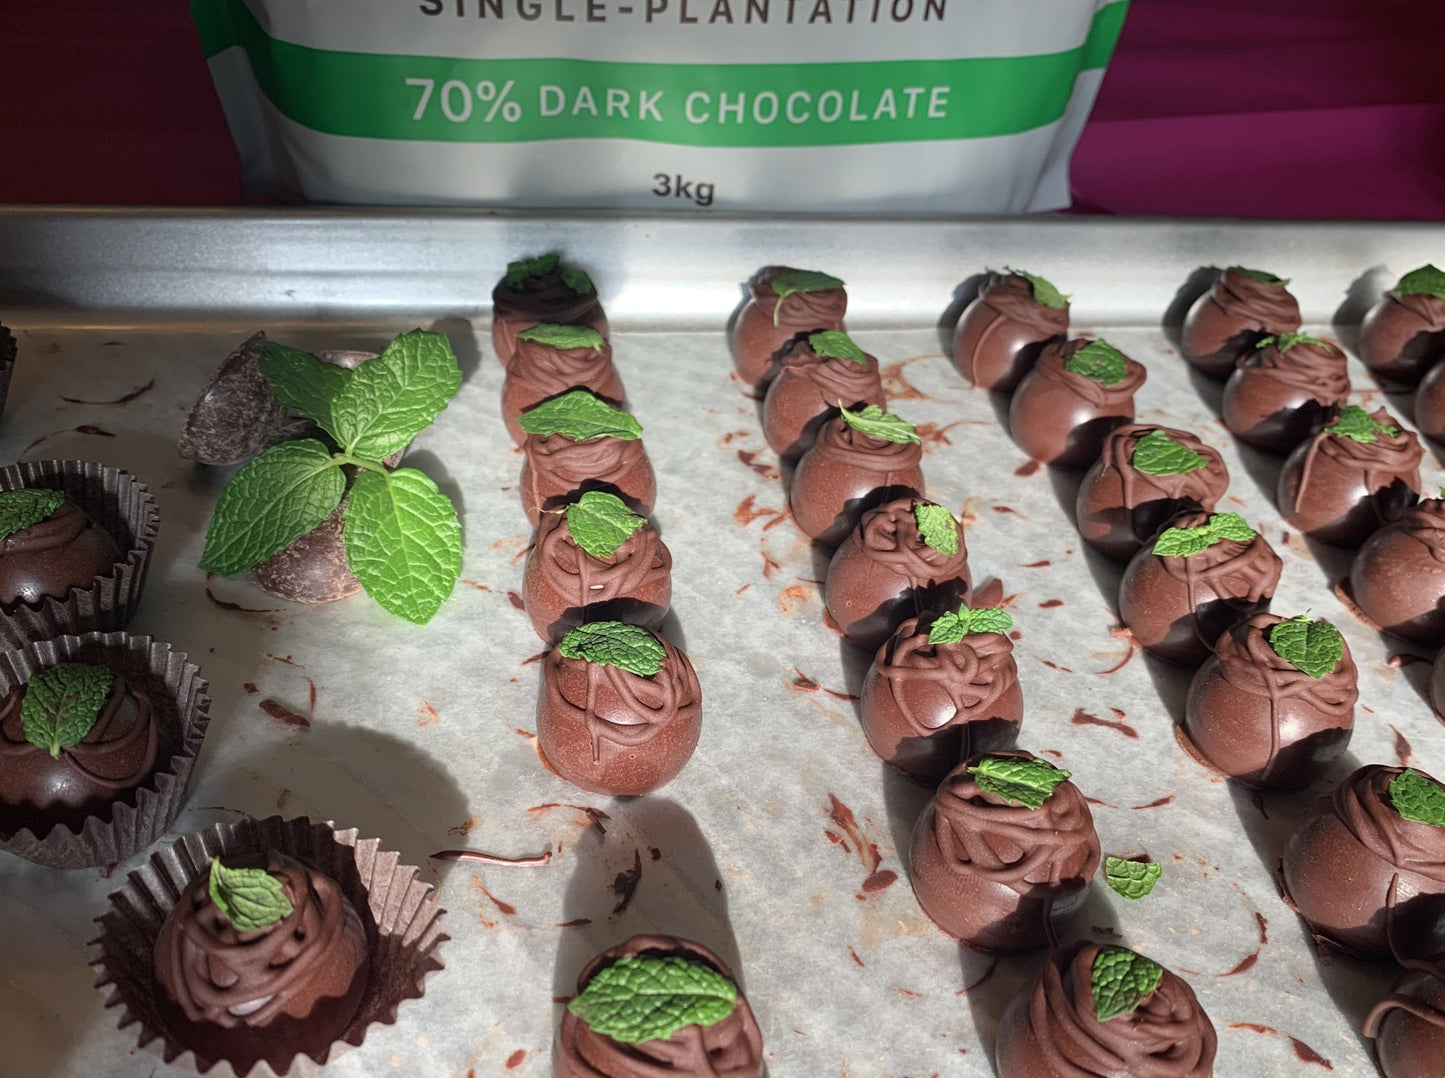 rows of 70% dark chocolate mint truffles topped with mint leaf